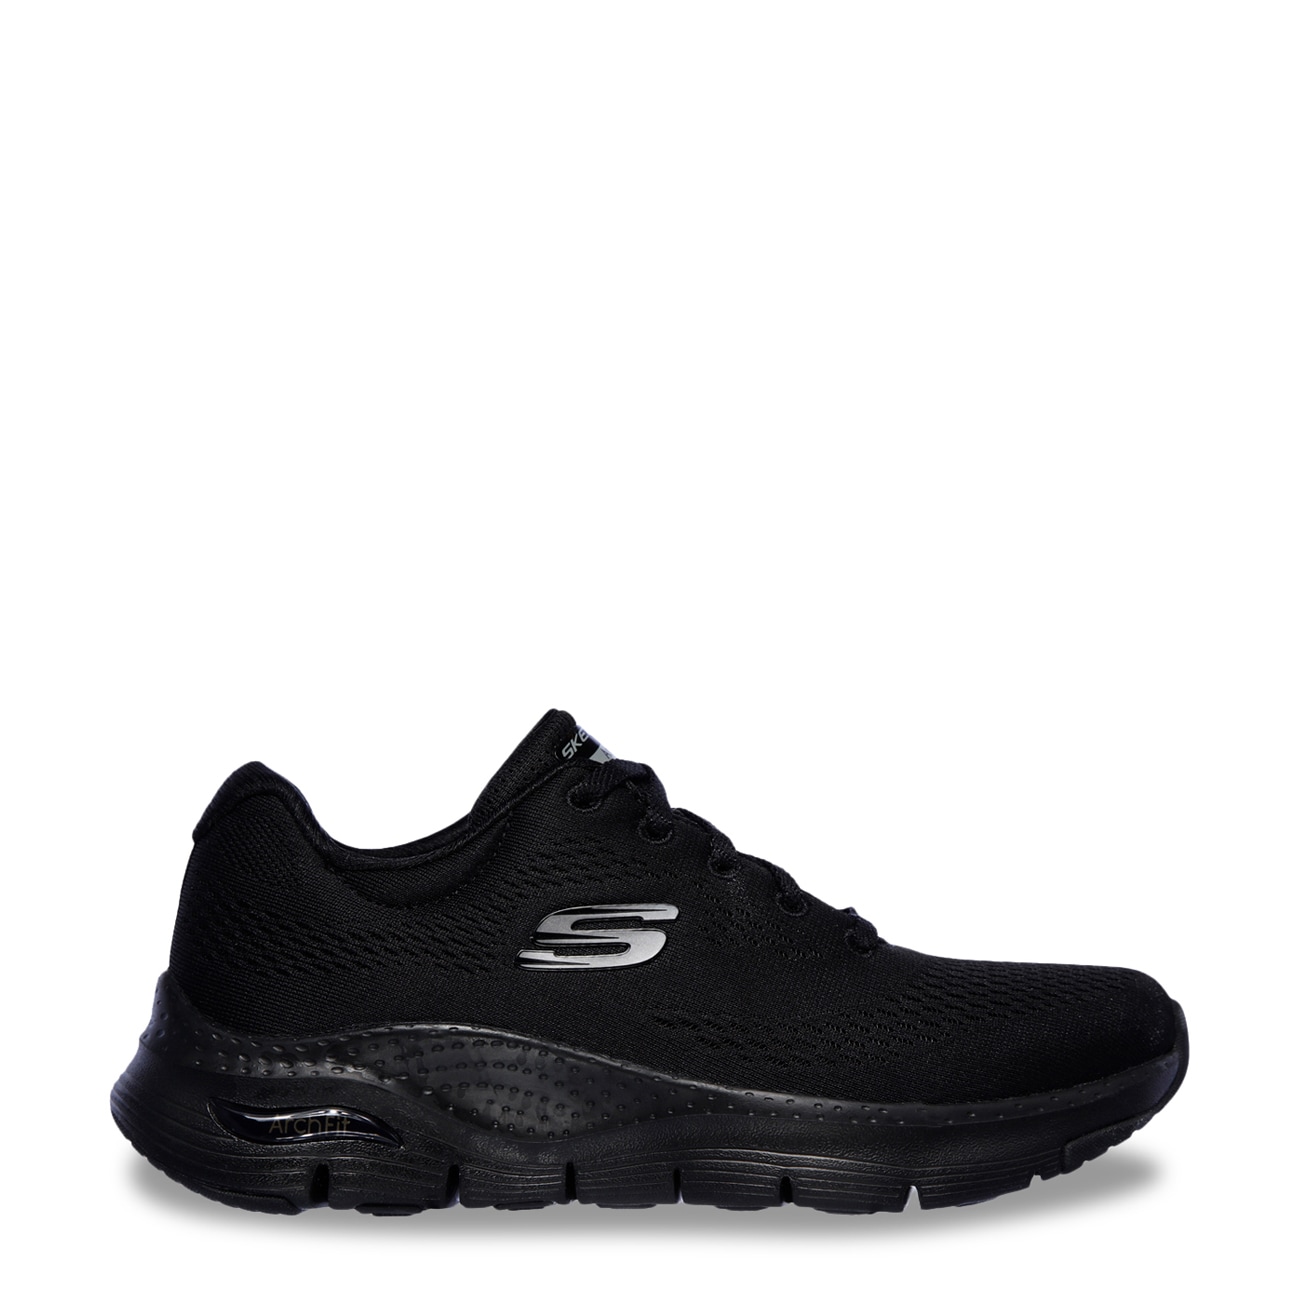 where to purchase skechers shoes